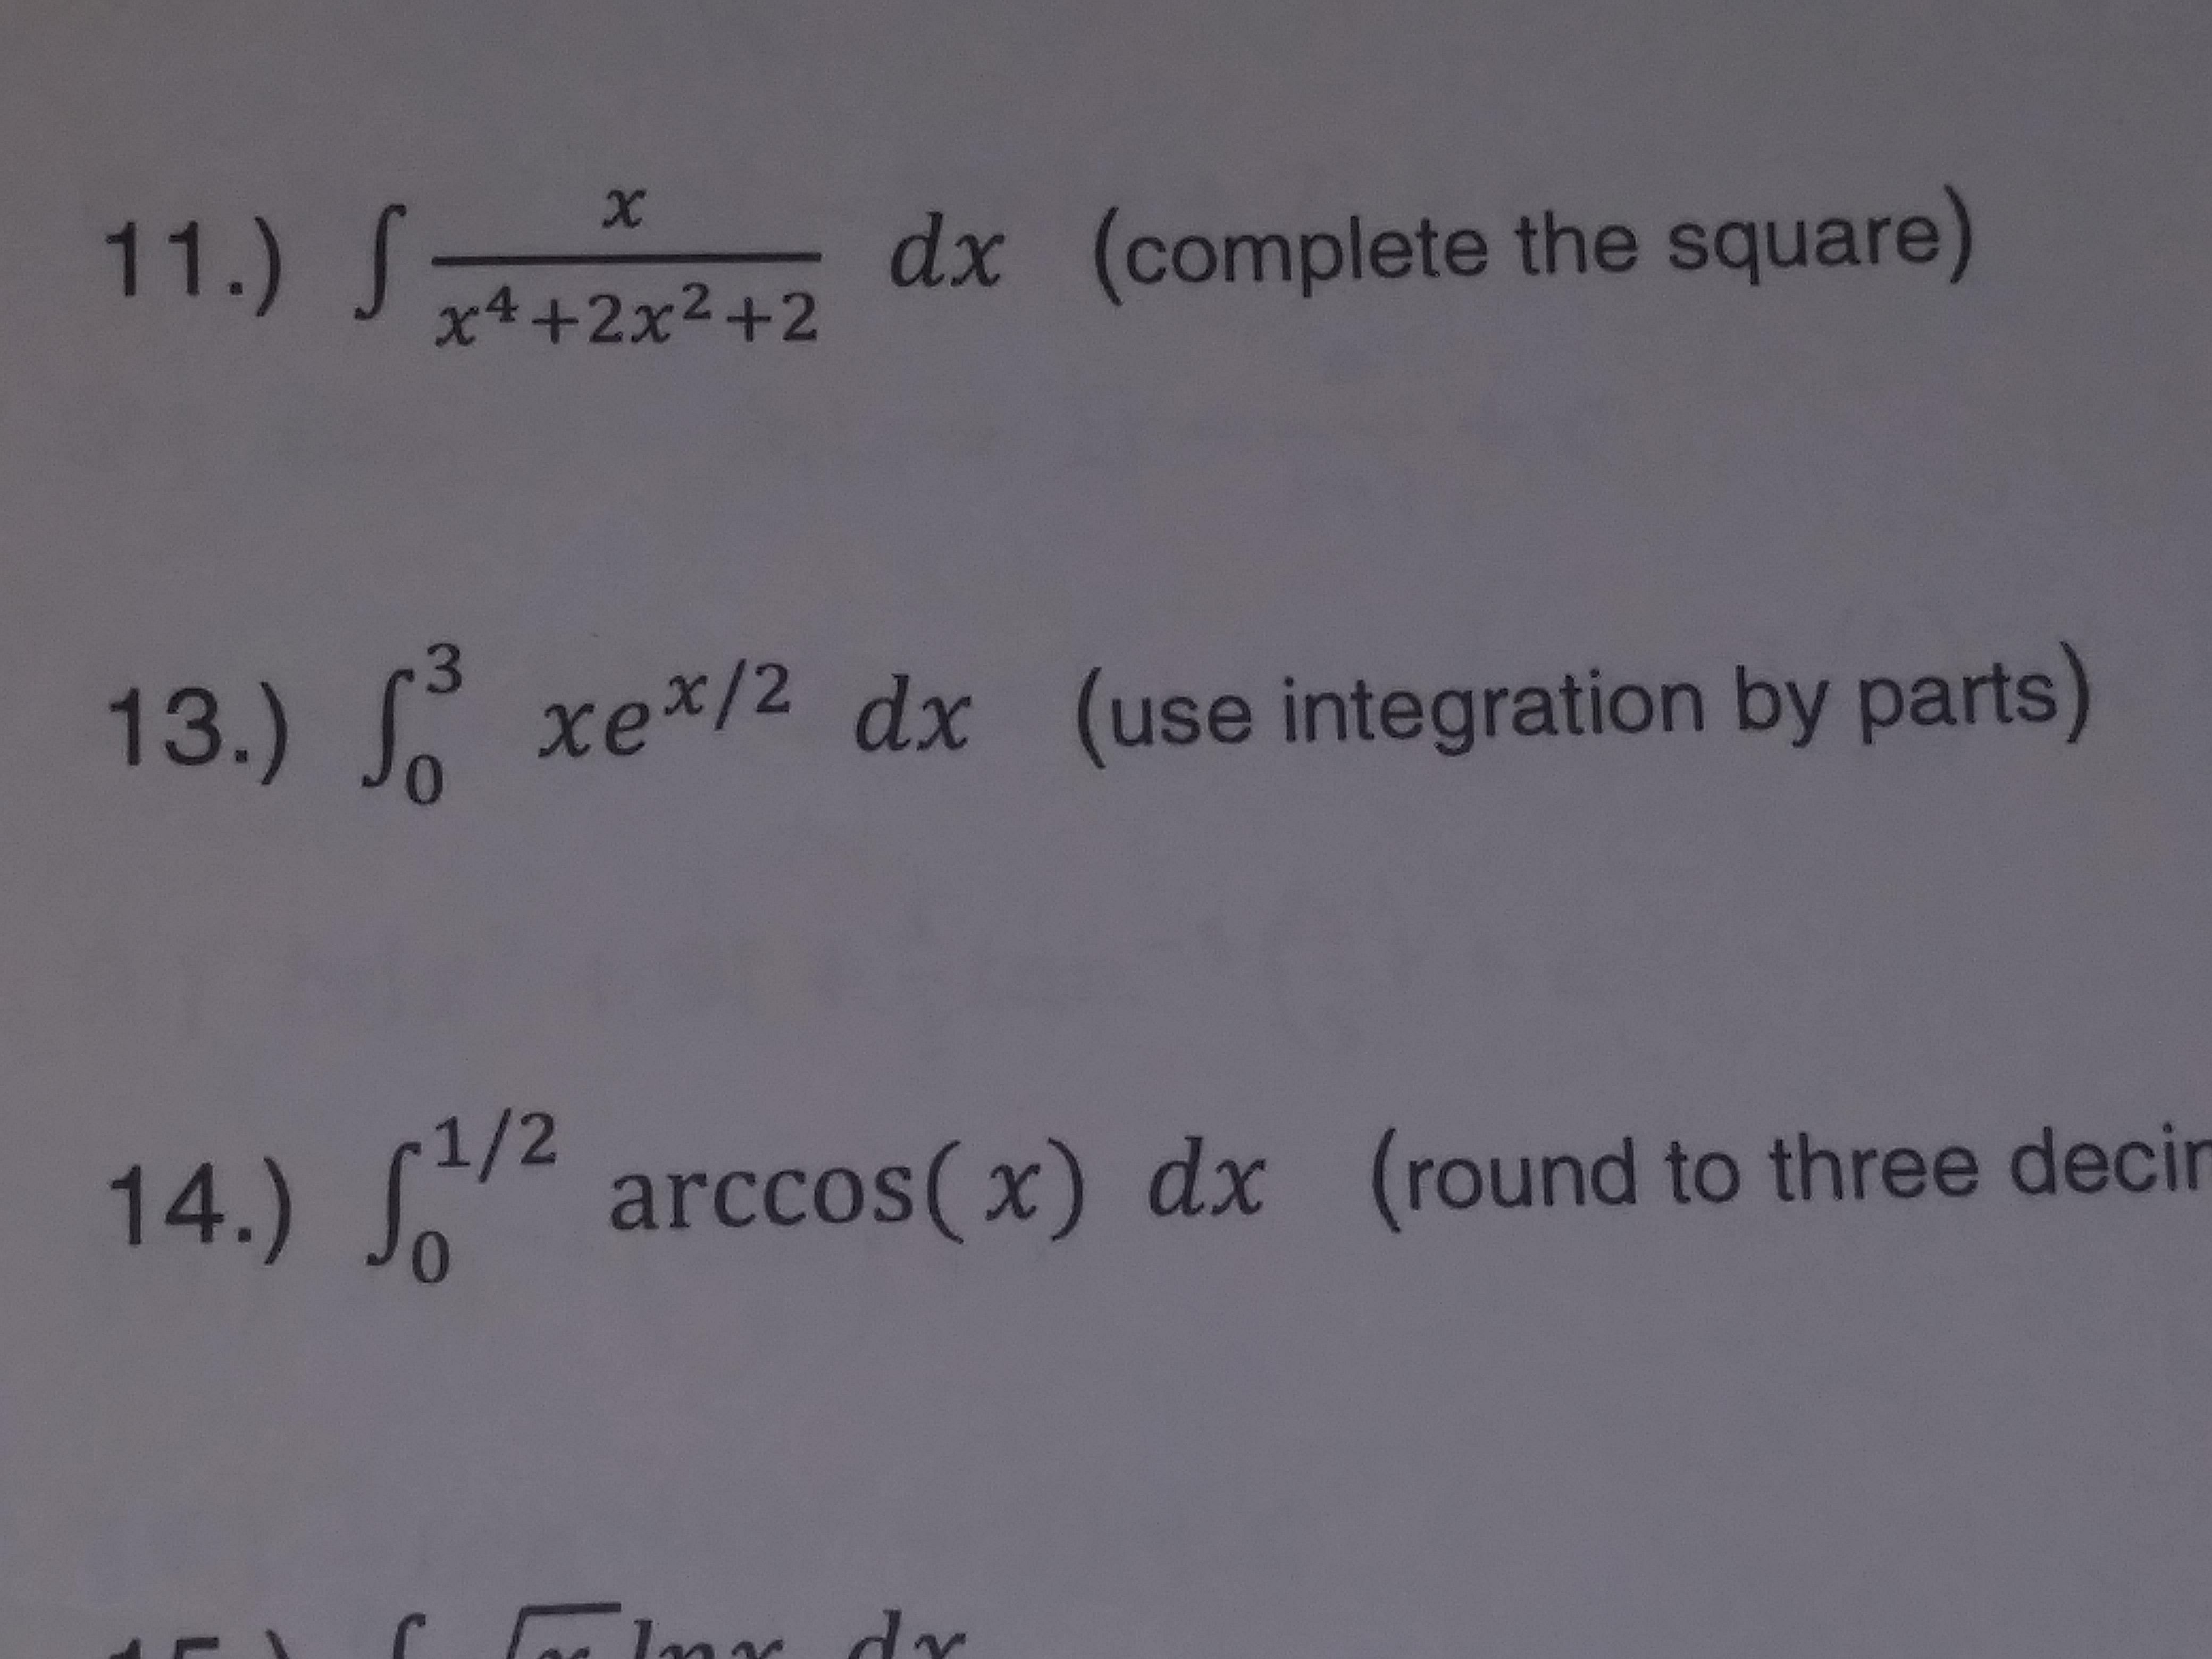 12 dx (complete the square)
13.) f
14.)arccos(x) dx (round to three deci
x4 +2x2+2
xel dx (use integration by parts)
0
1/2
